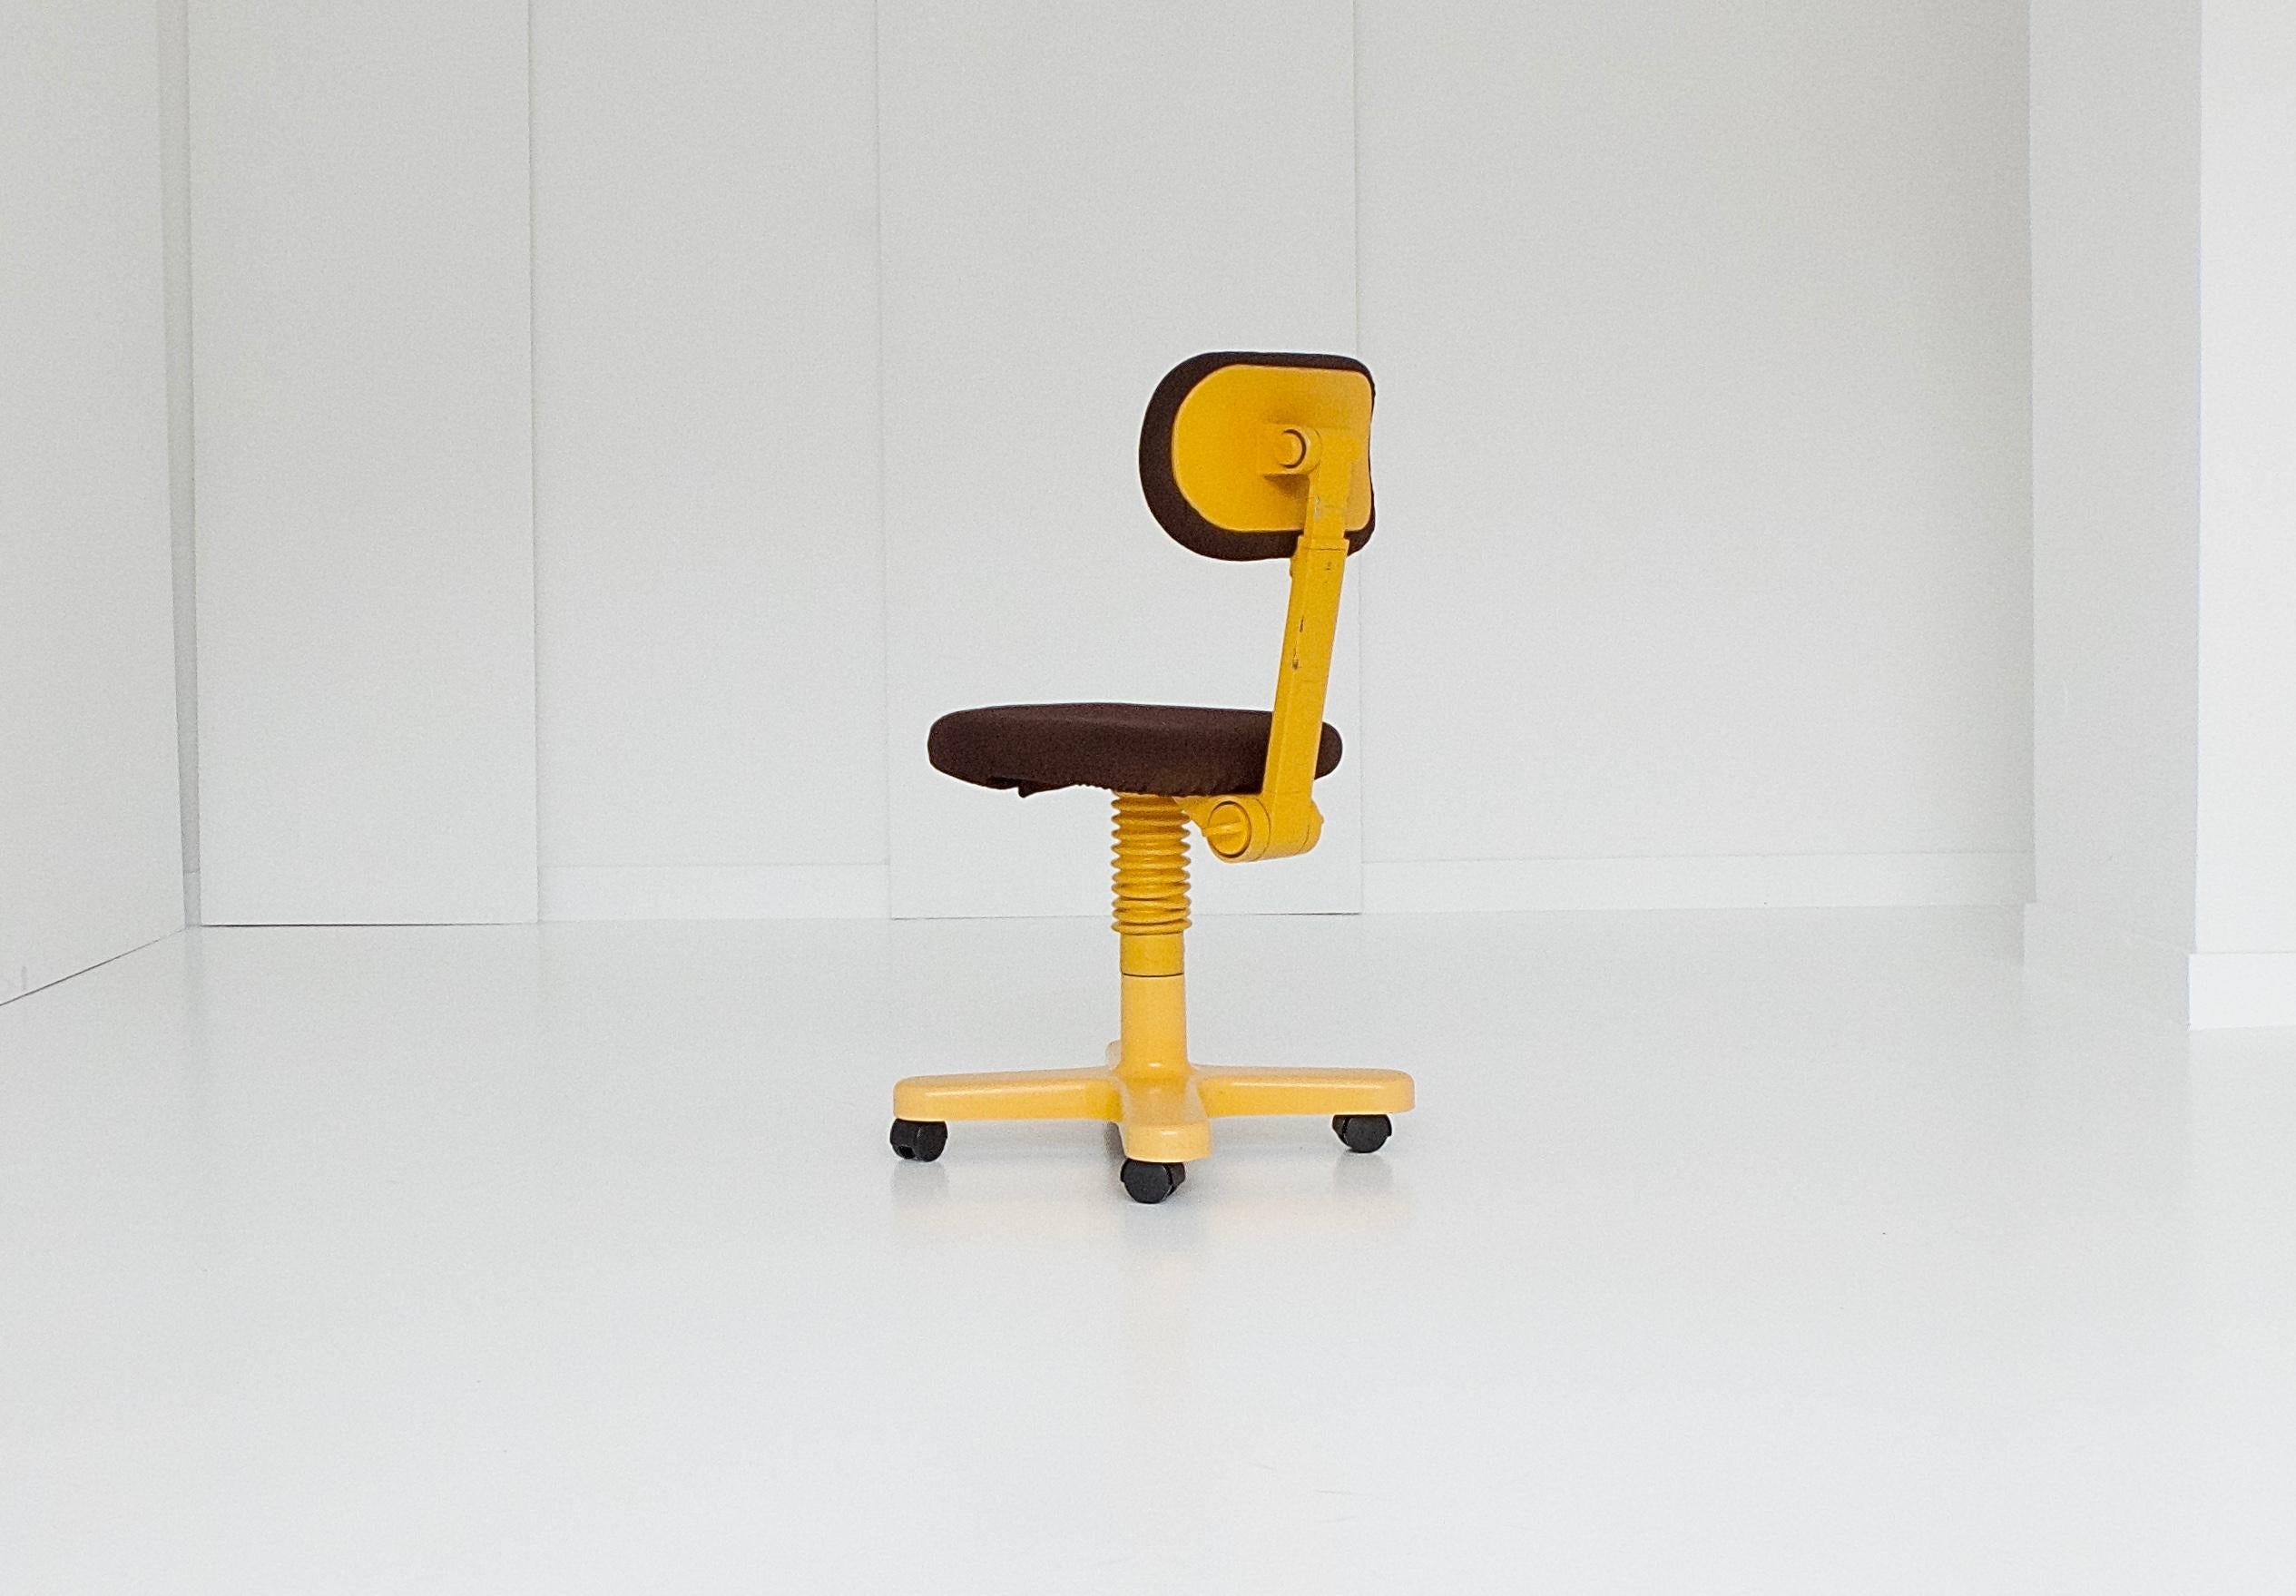 Synthesis 45 typist’s adjustable swivel chair, designed 1970 by Ettore Sottsass. Injection-moulded abs, aluminium, steel, textile-covered polyurethane foam.
Seat and back height adjustable.

This is a piece of Italian design history, precisely